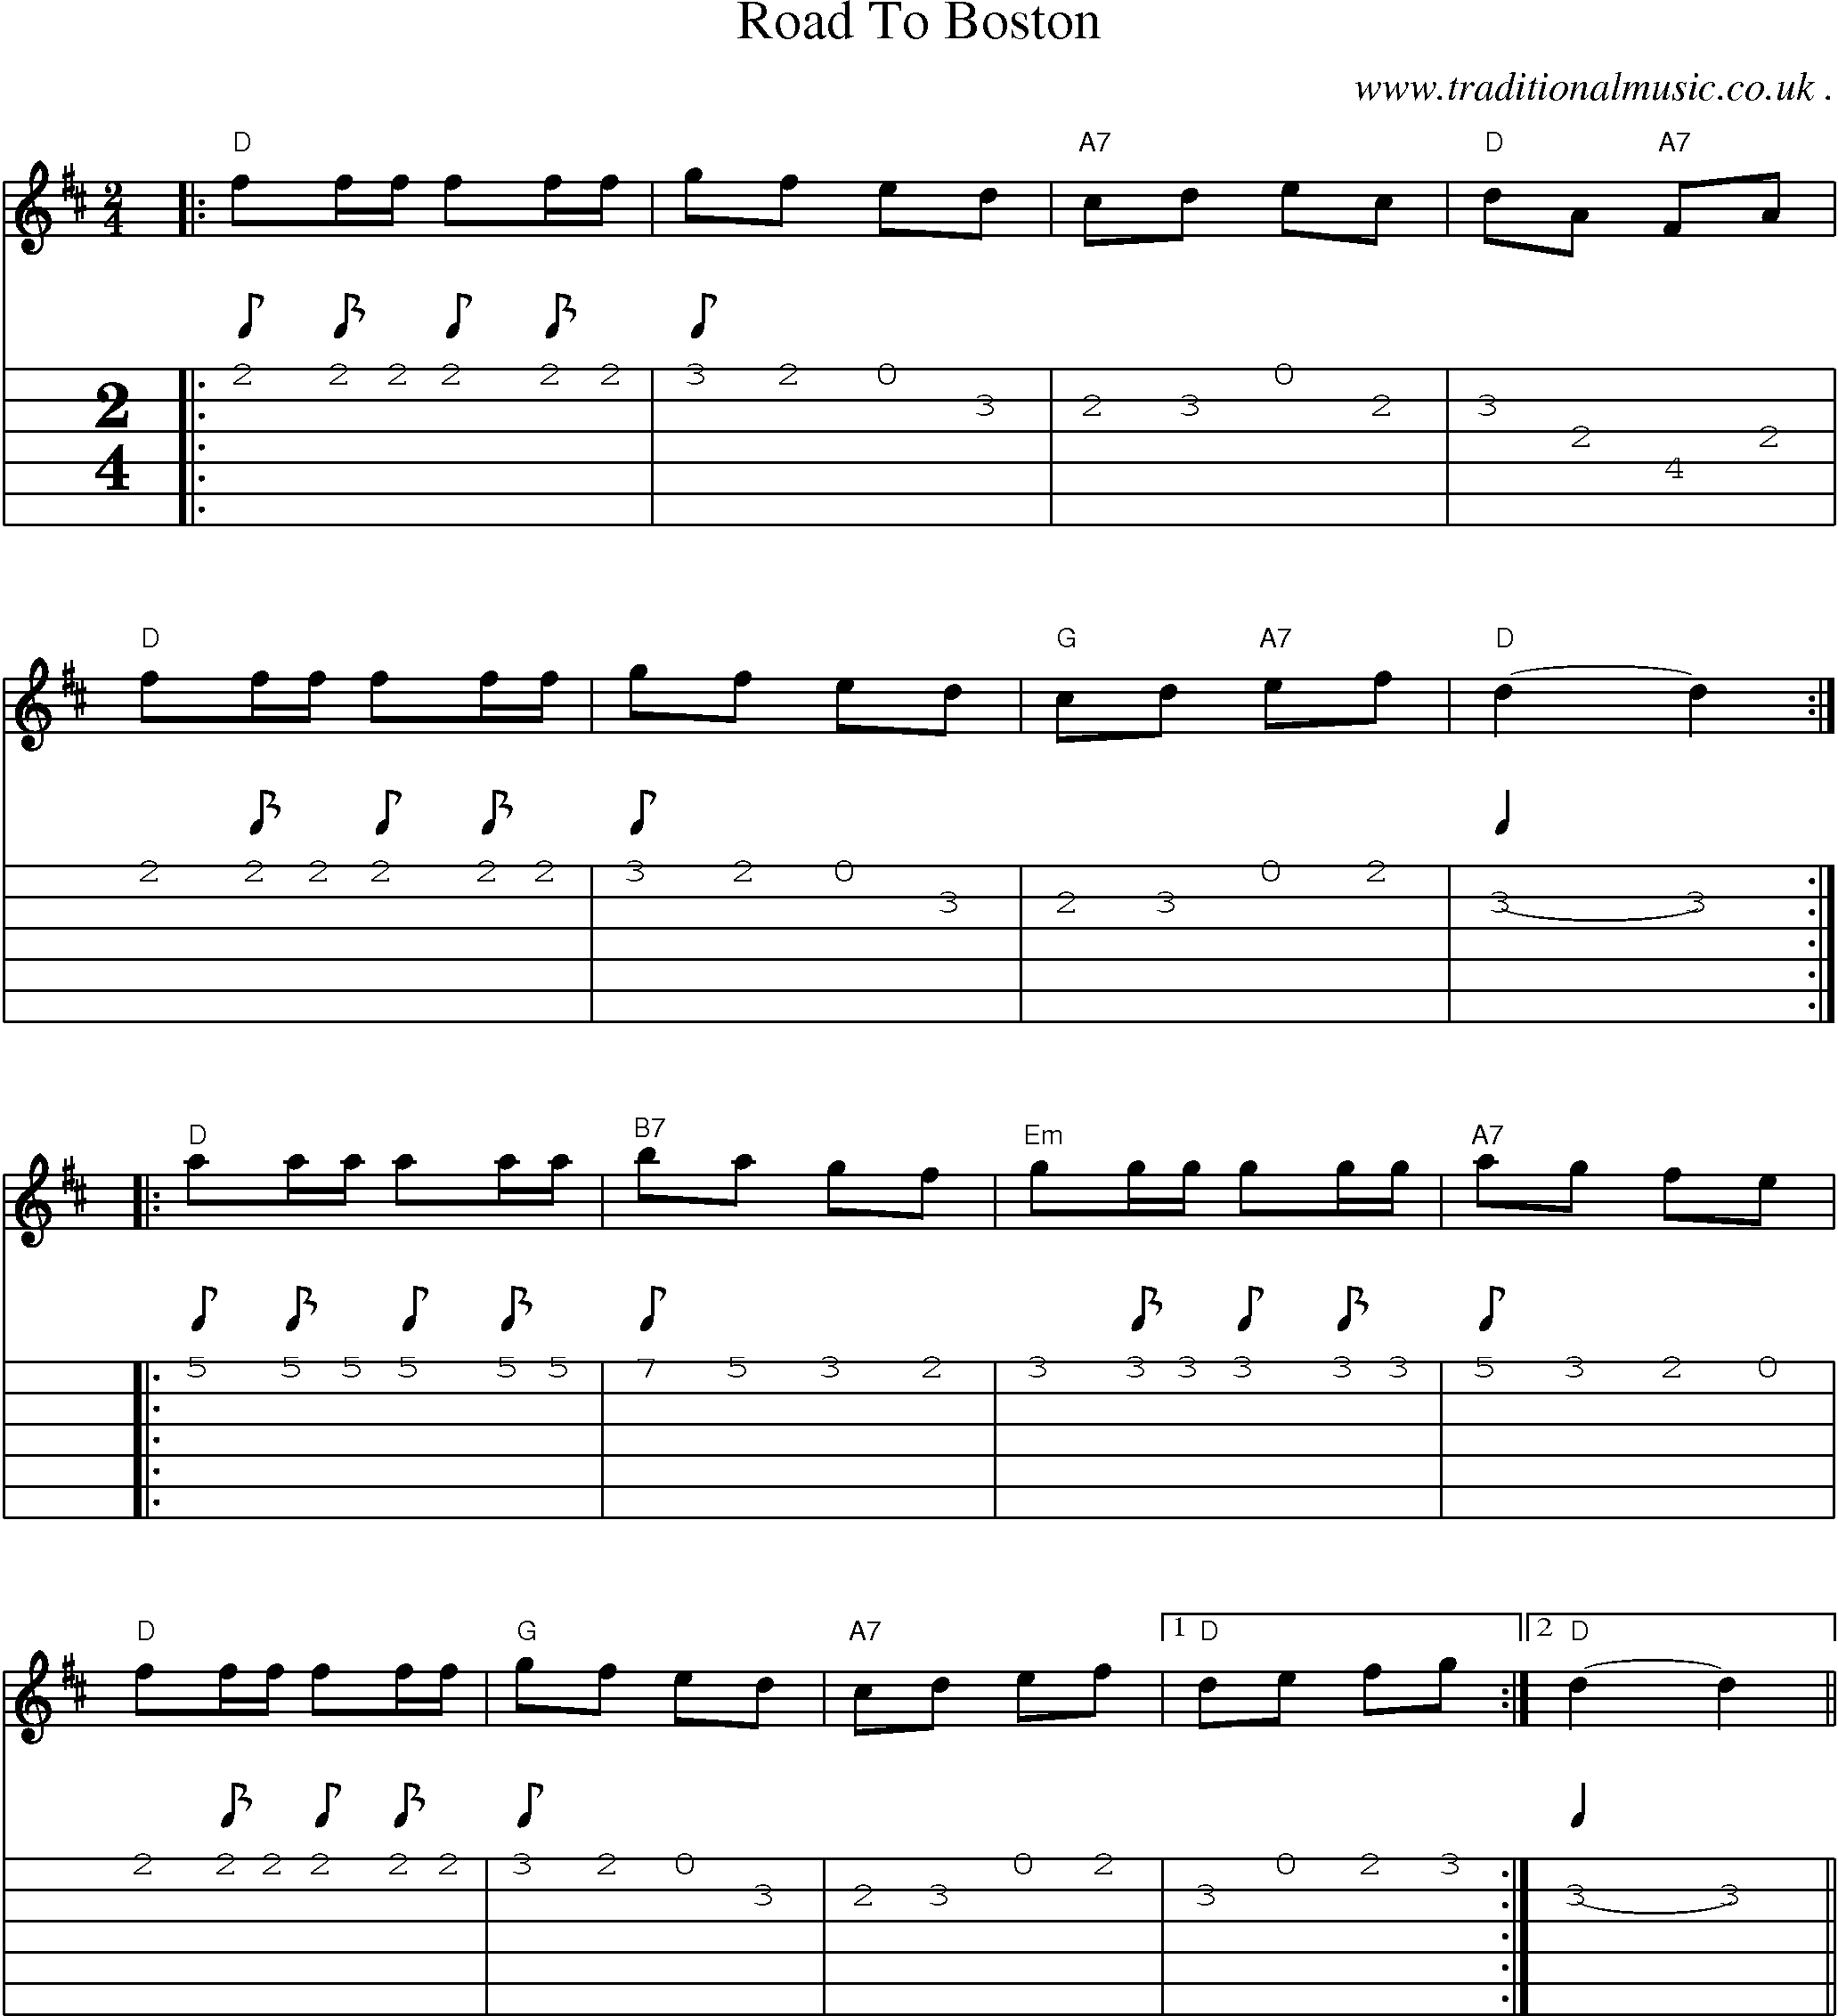 Music Score and Guitar Tabs for Road To Boston